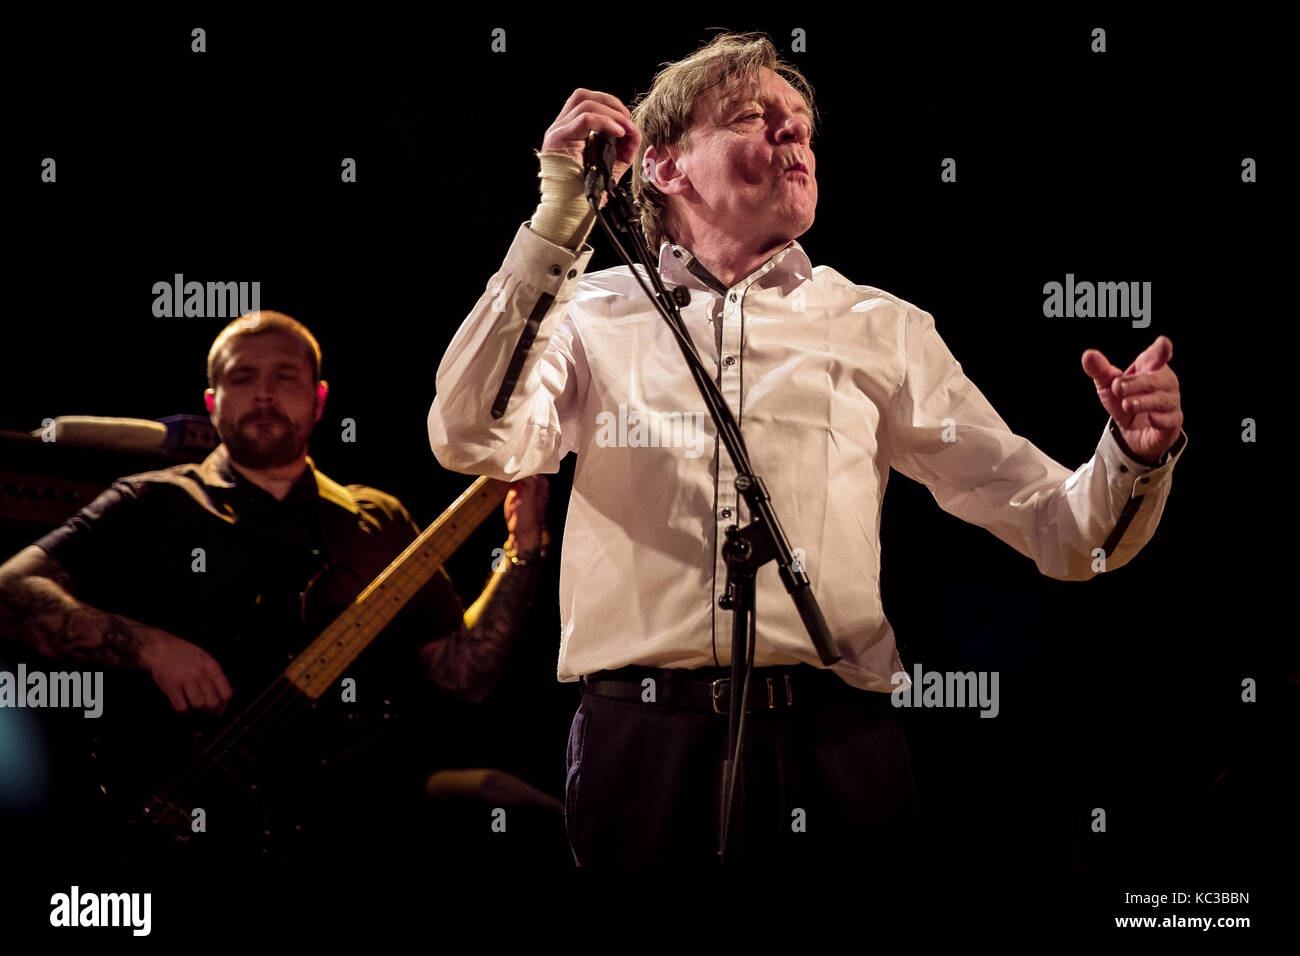 The English post-punk band The Fall performs a live concert at Vulkan Arena as part of Oslo Psych Festival 2016. Here singer, songwriter and musician Mark E. Smith is seen live on stage. Norway, 11/11 2016. Stock Photo